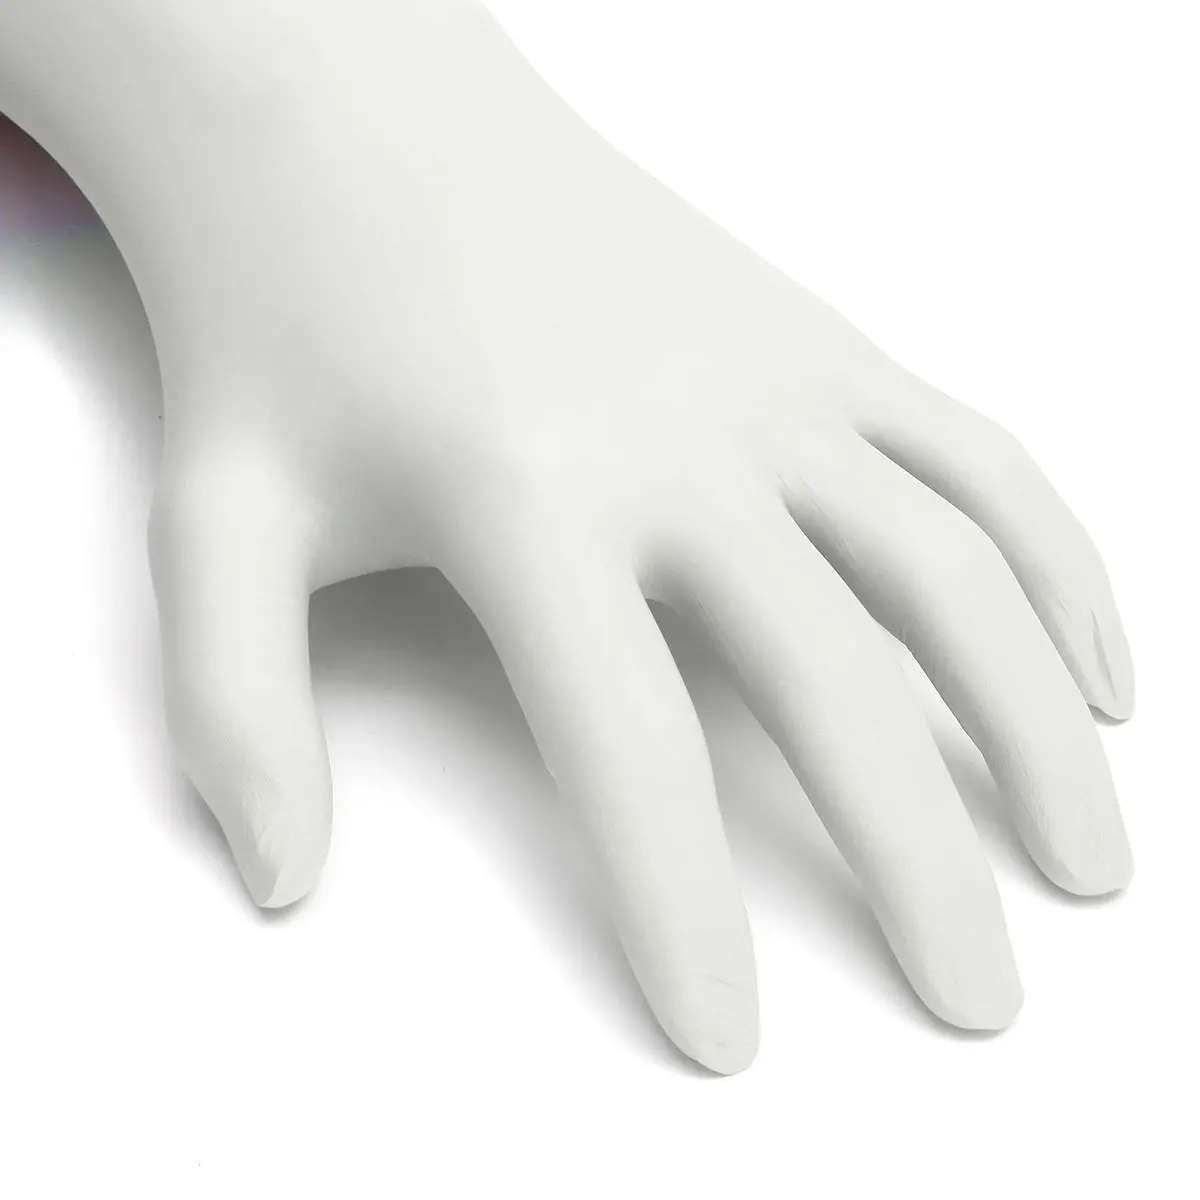 100-pcs-White-Thickness-Disposable-Nitrile-Latex-Gloves-Waterproof-Kitchen-Safety-Food-Prep-Cooking--1654524-7